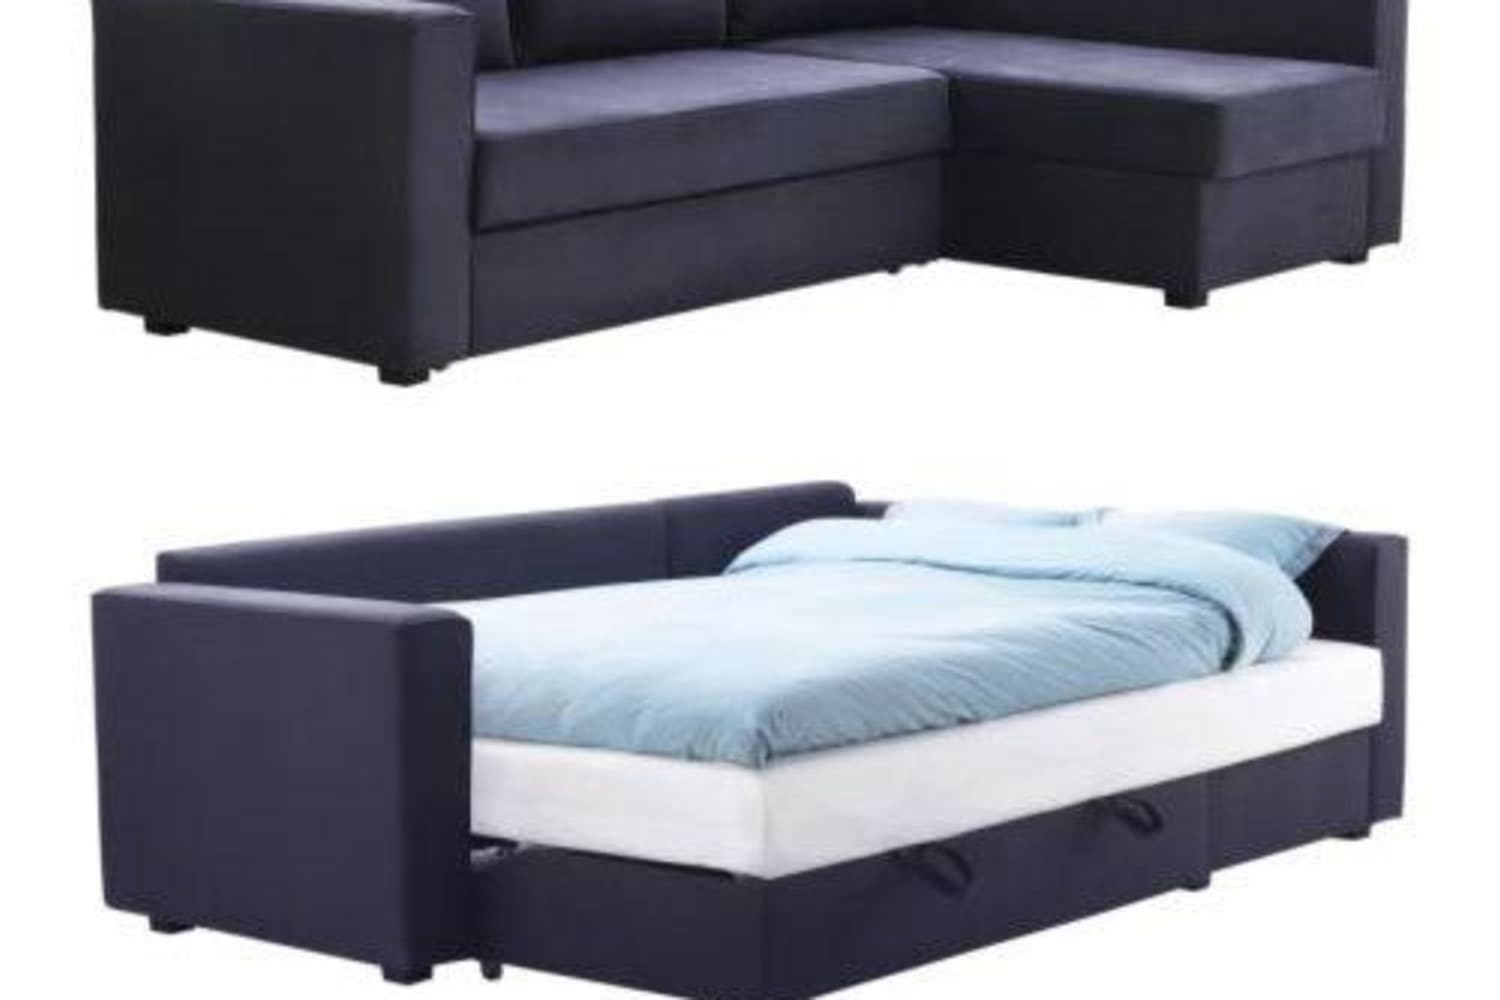 Modern Pull Out Sofa Bed for 2020 